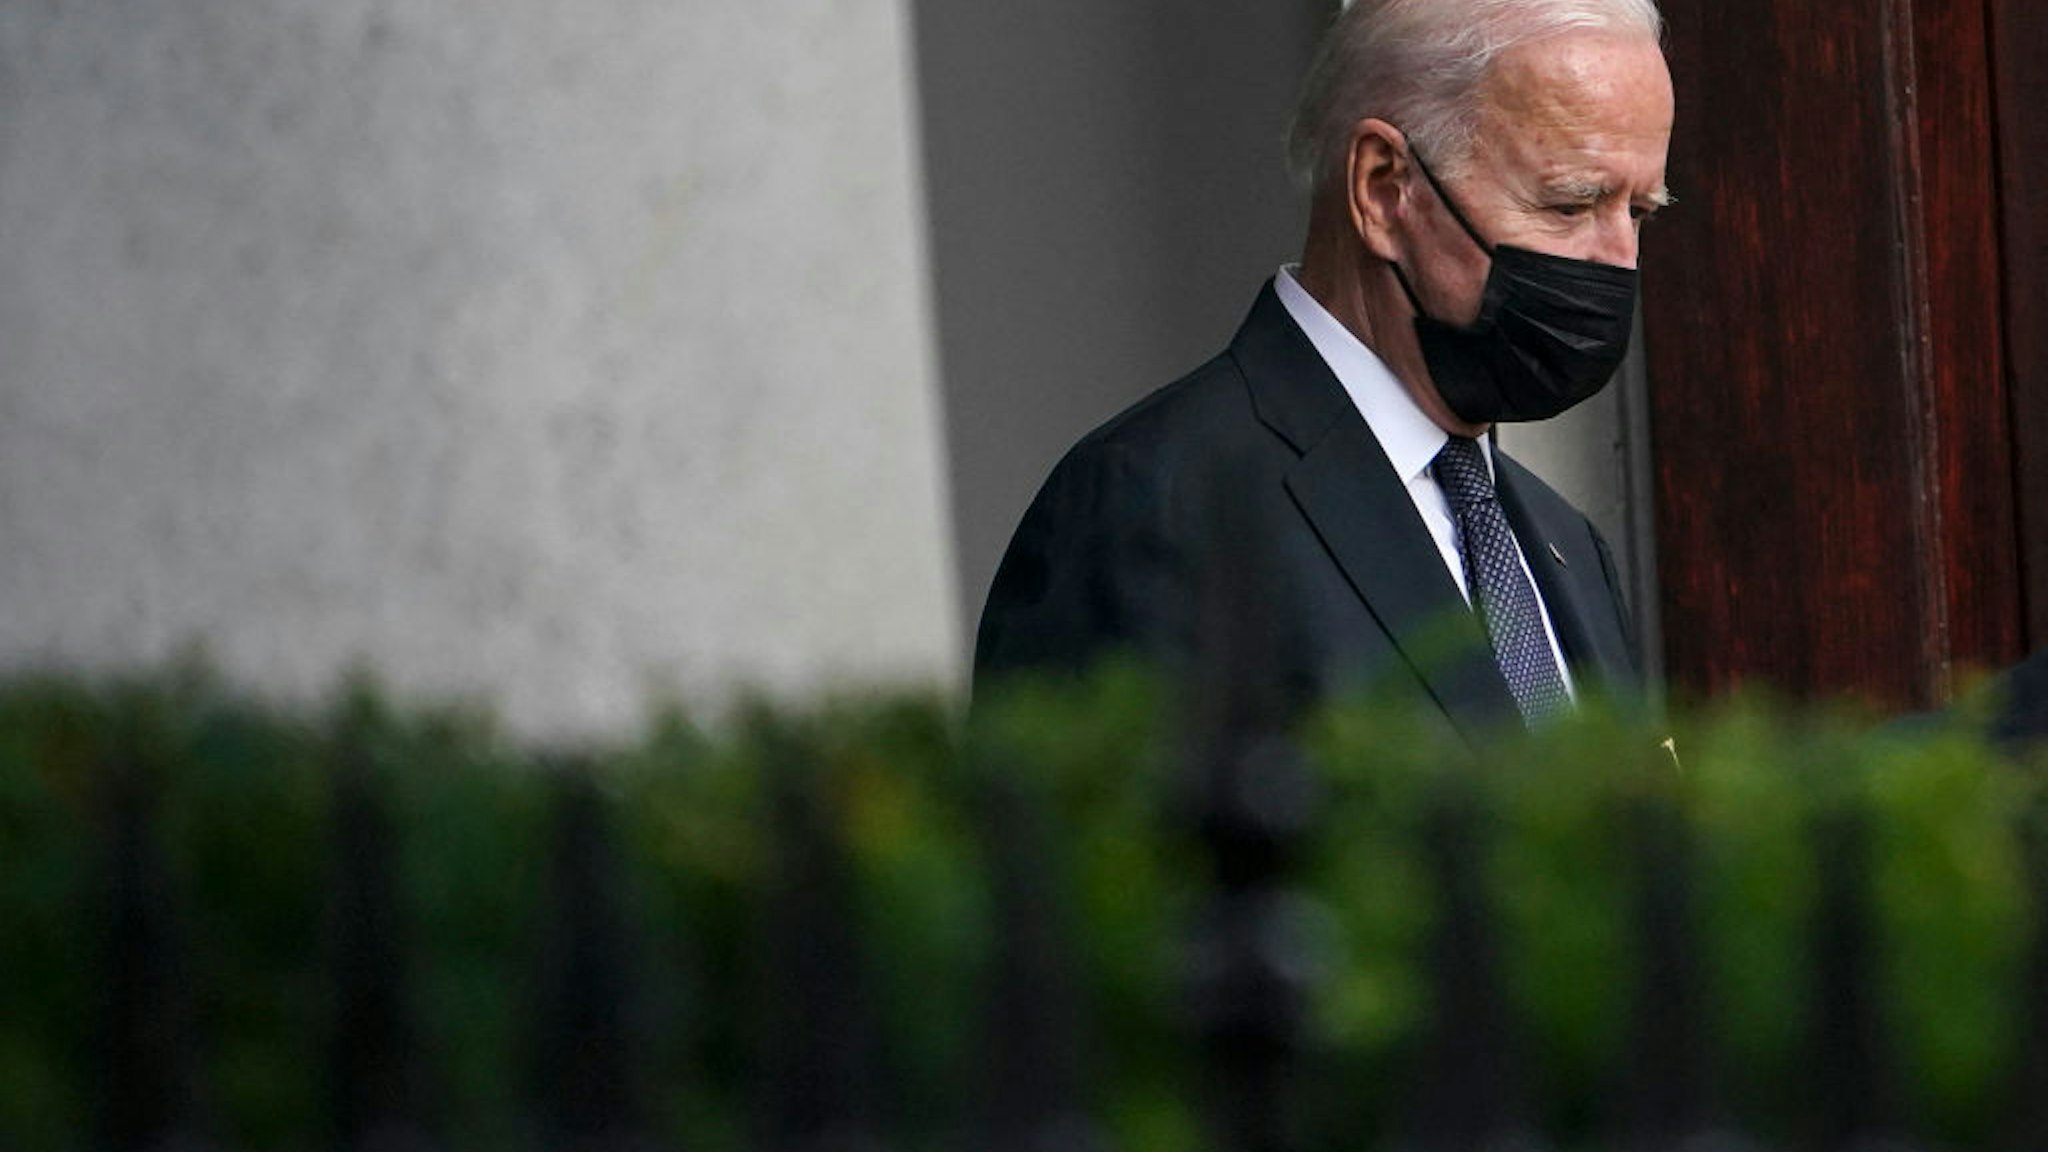 S President Joe Biden leaves the Holy Trinity church in the Georgetown neighborhood of Washington, DC after attending mass there on August 29, 2021. (Photo by ANDREW CABALLERO-REYNOLDS / AFP) (Photo by ANDREW CABALLERO-REYNOLDS/AFP via Getty Images)